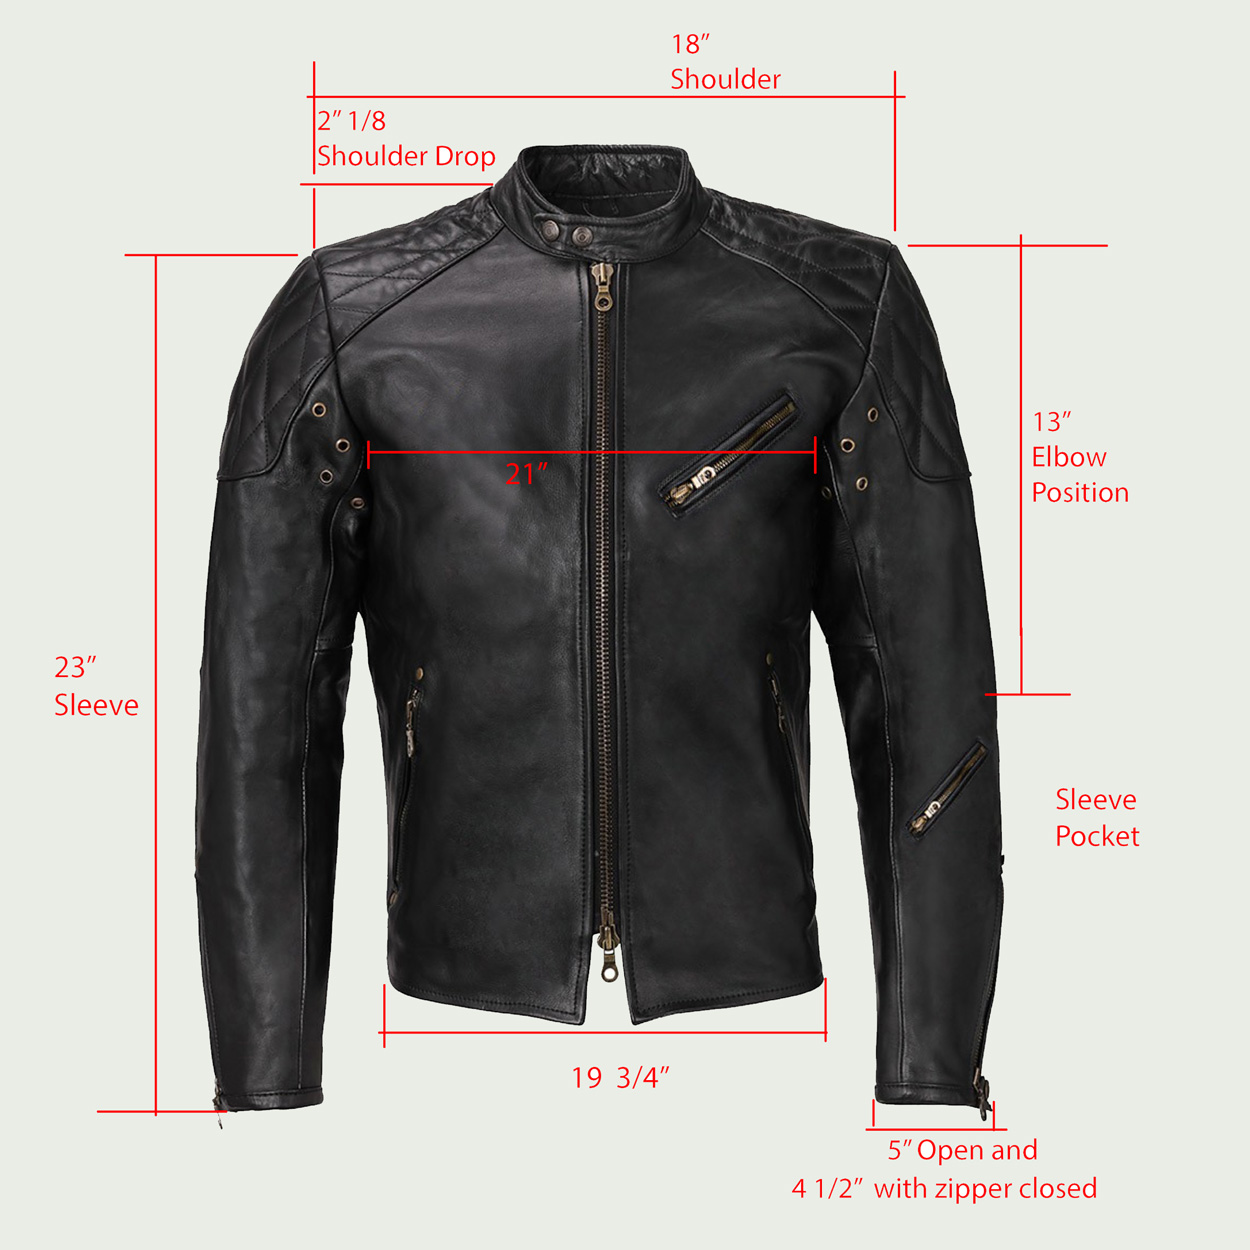 How much does motorcycle gear REALLY cost?